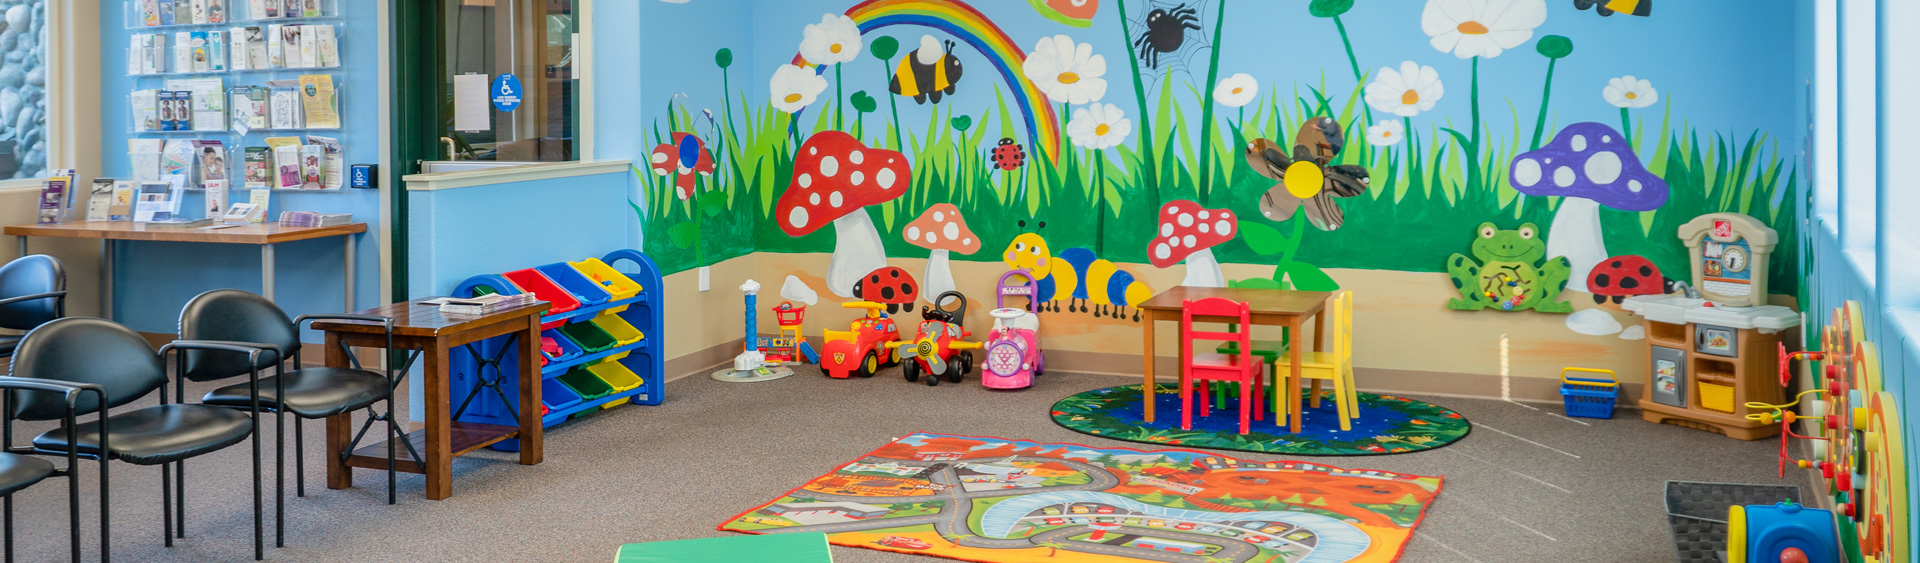 Picture of the Siskiyou Pediatric Waiting Room